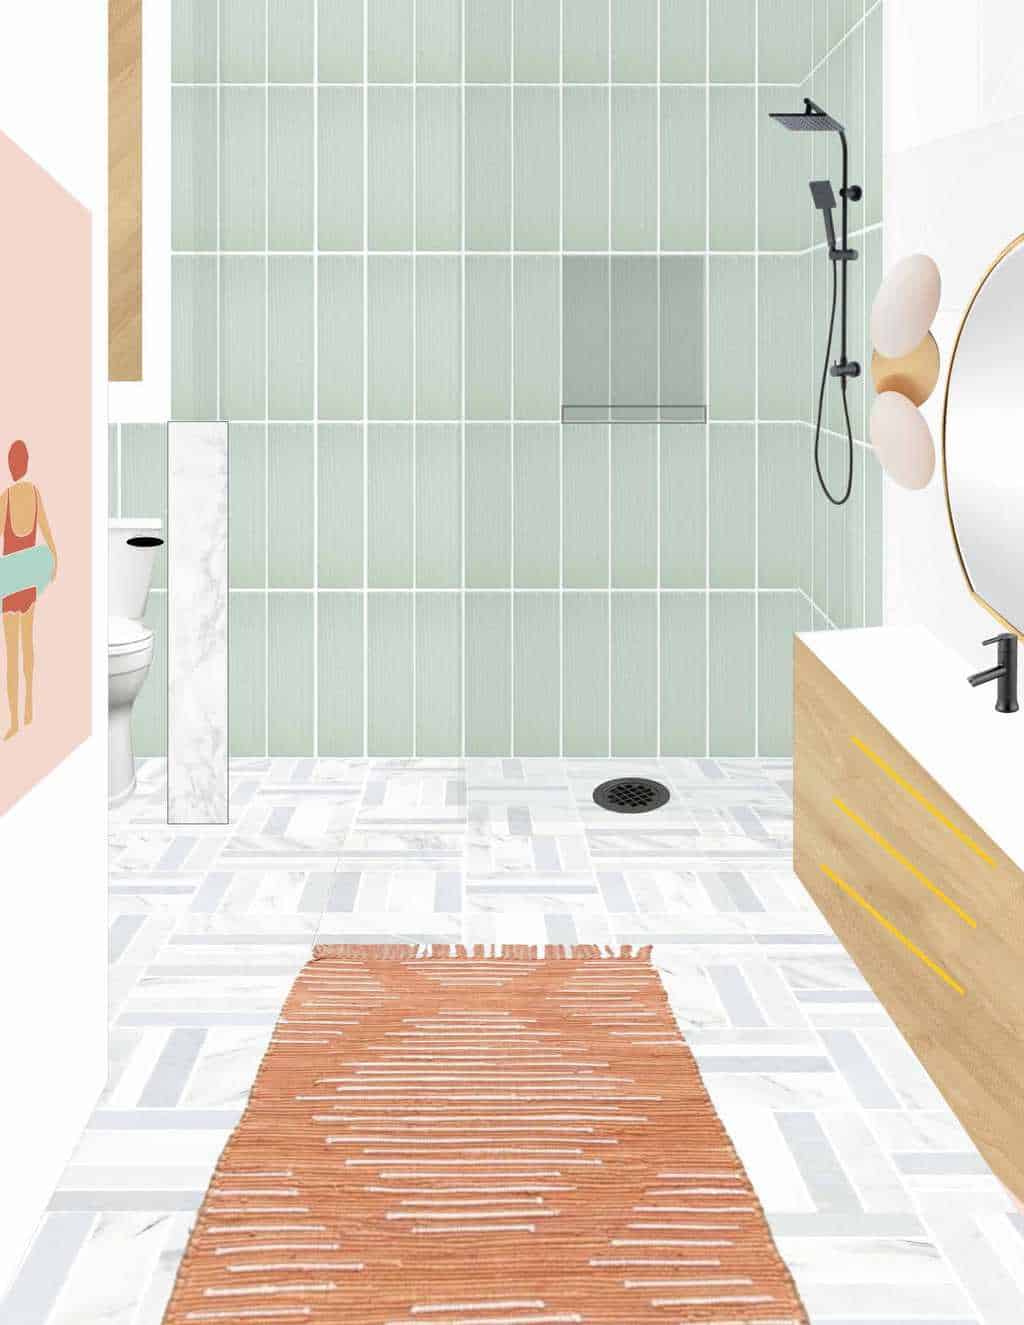 mockup layout of the the new guest bathroom design idea by sugar and cloth